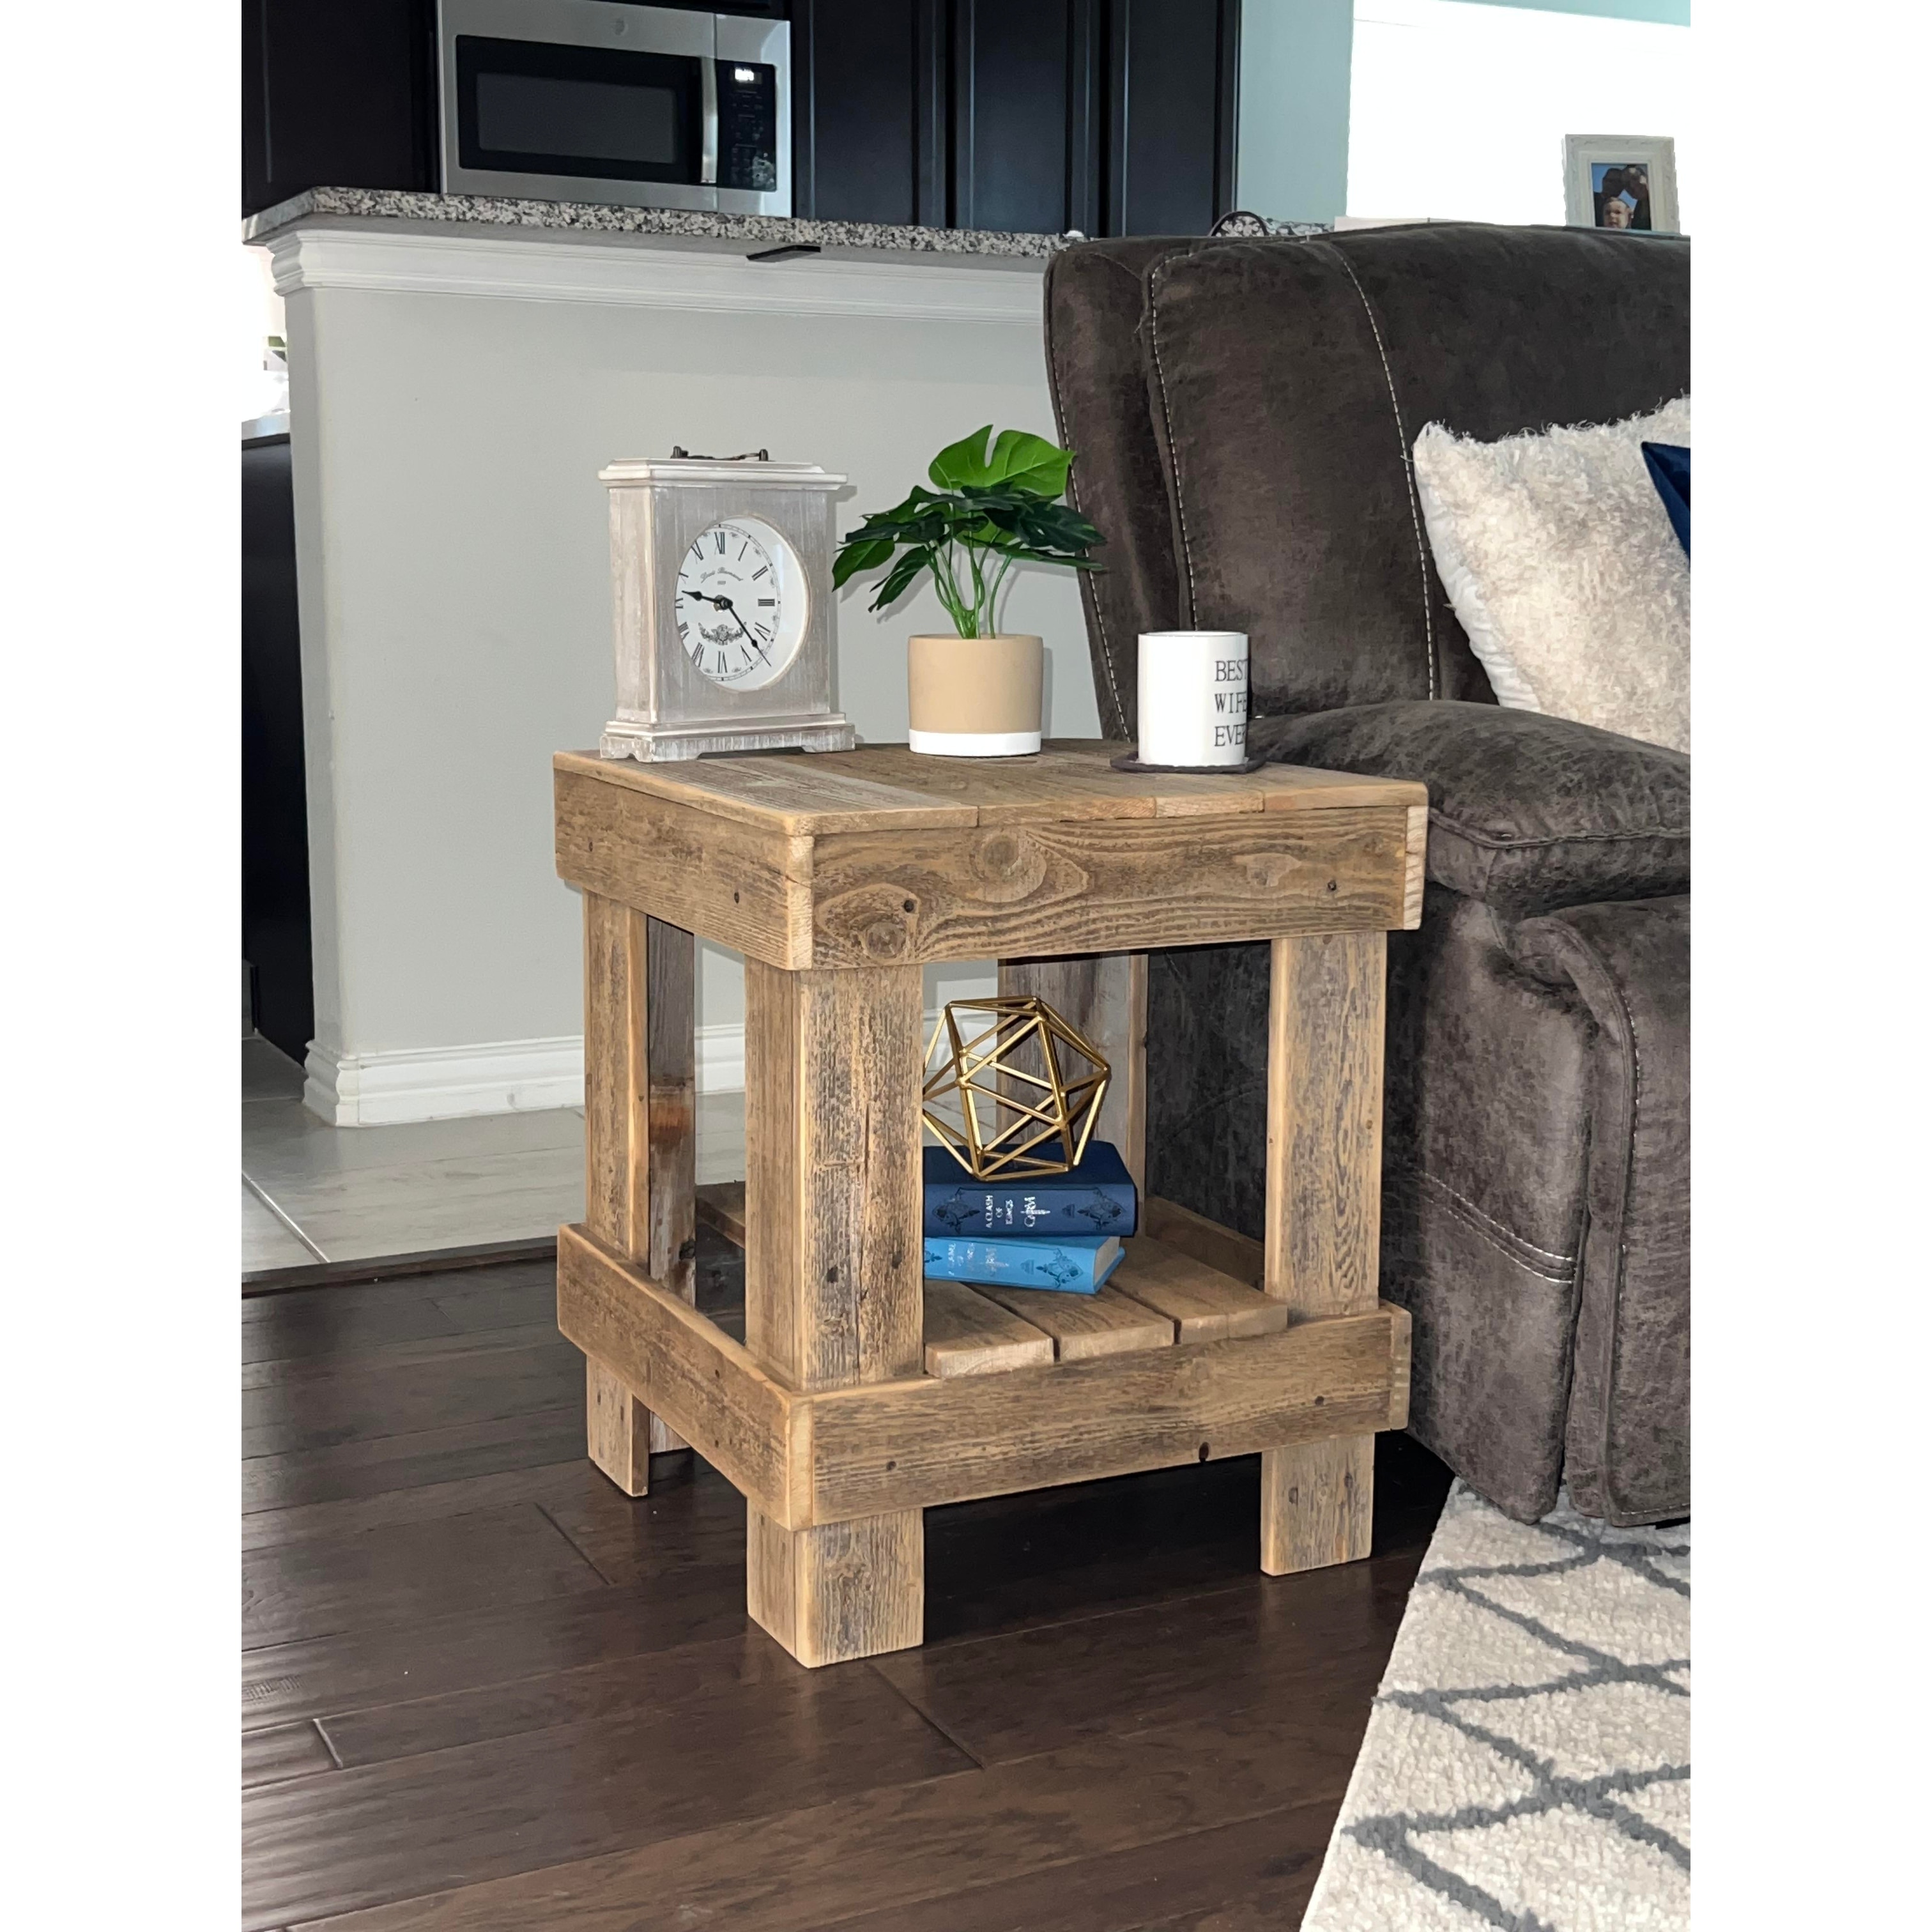 Kamiler Nightstand with Drawer Entry Tables Iron Side Table 2 Mesh Shelves,End Table Storage Console Sofa Table Rustic for Entryway/Hallway/Living Room/Bedroom